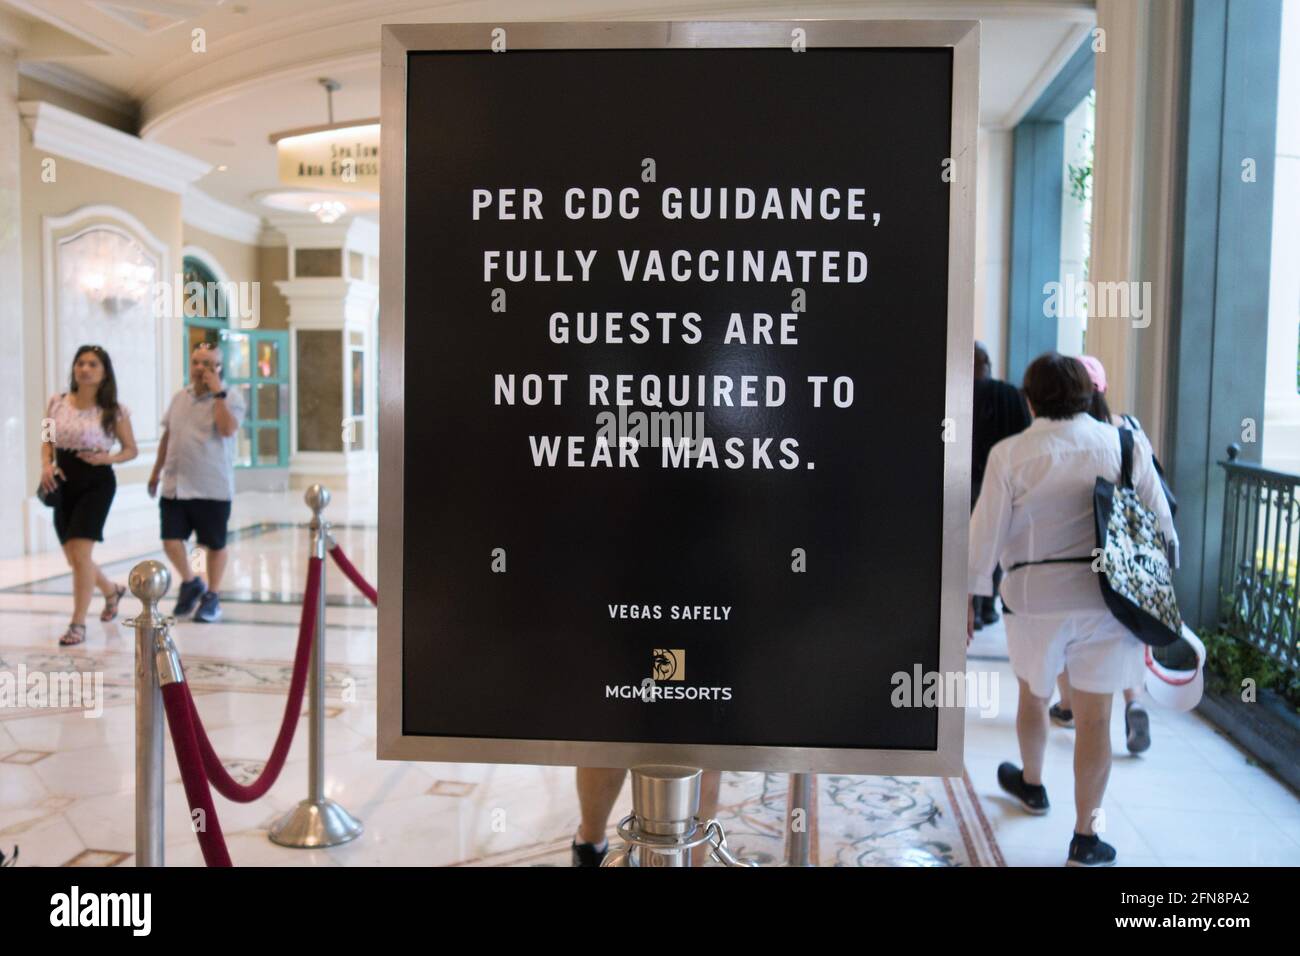 Unmasked people walking near a sign that states fully vaccinated guests are not required to wear masks, at the Bellagio Hotel in Las Vegas, Nevada. Stock Photo